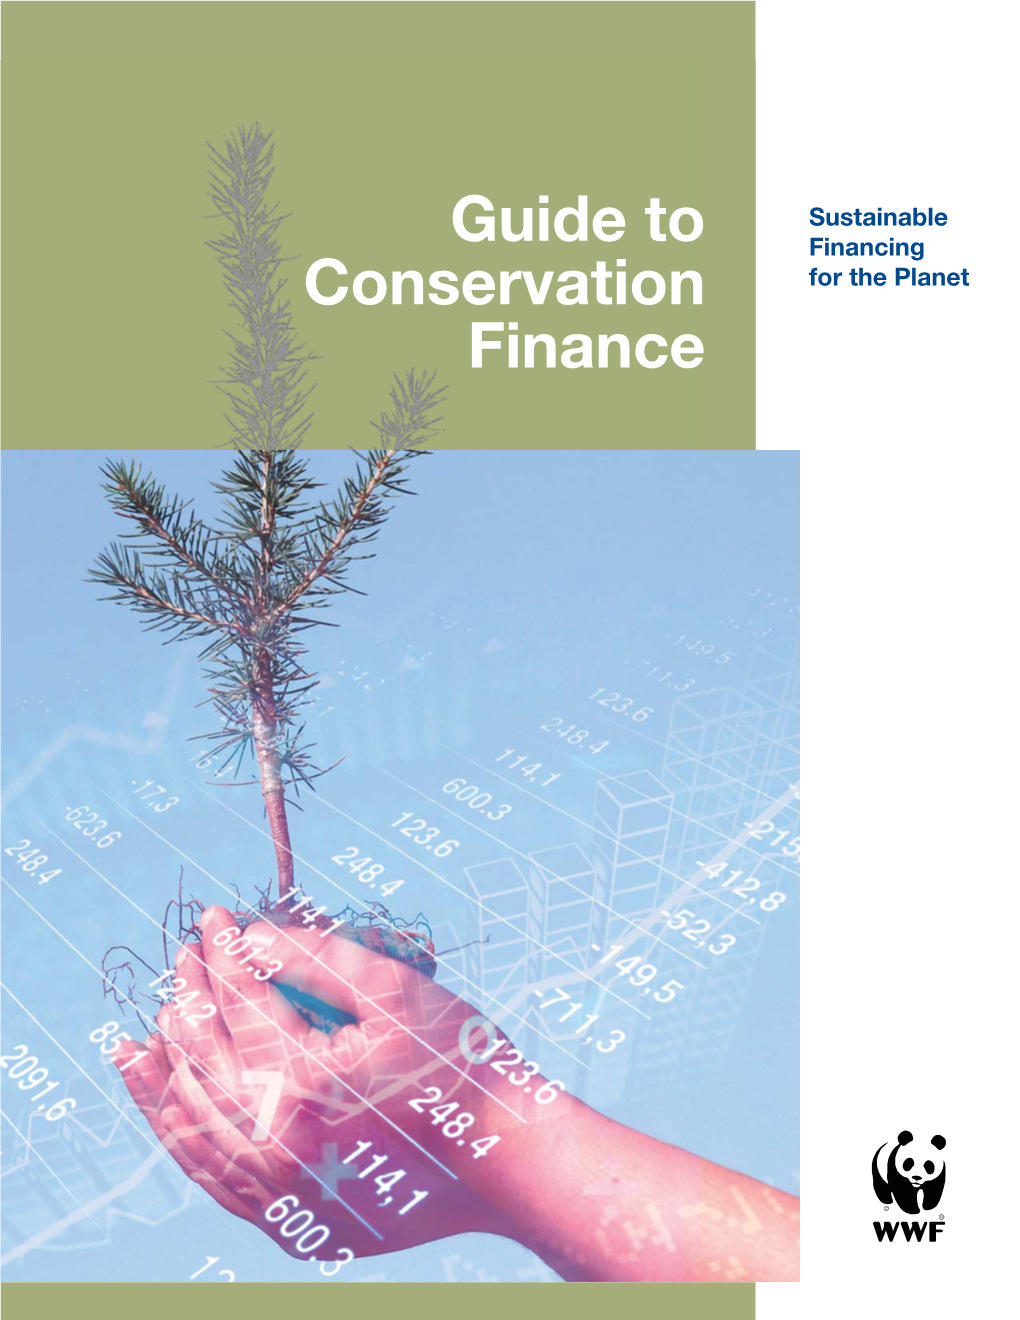 GUIDE to CONSERVATION FINANCE I 3.4 Tourism Operations in Protected Areas